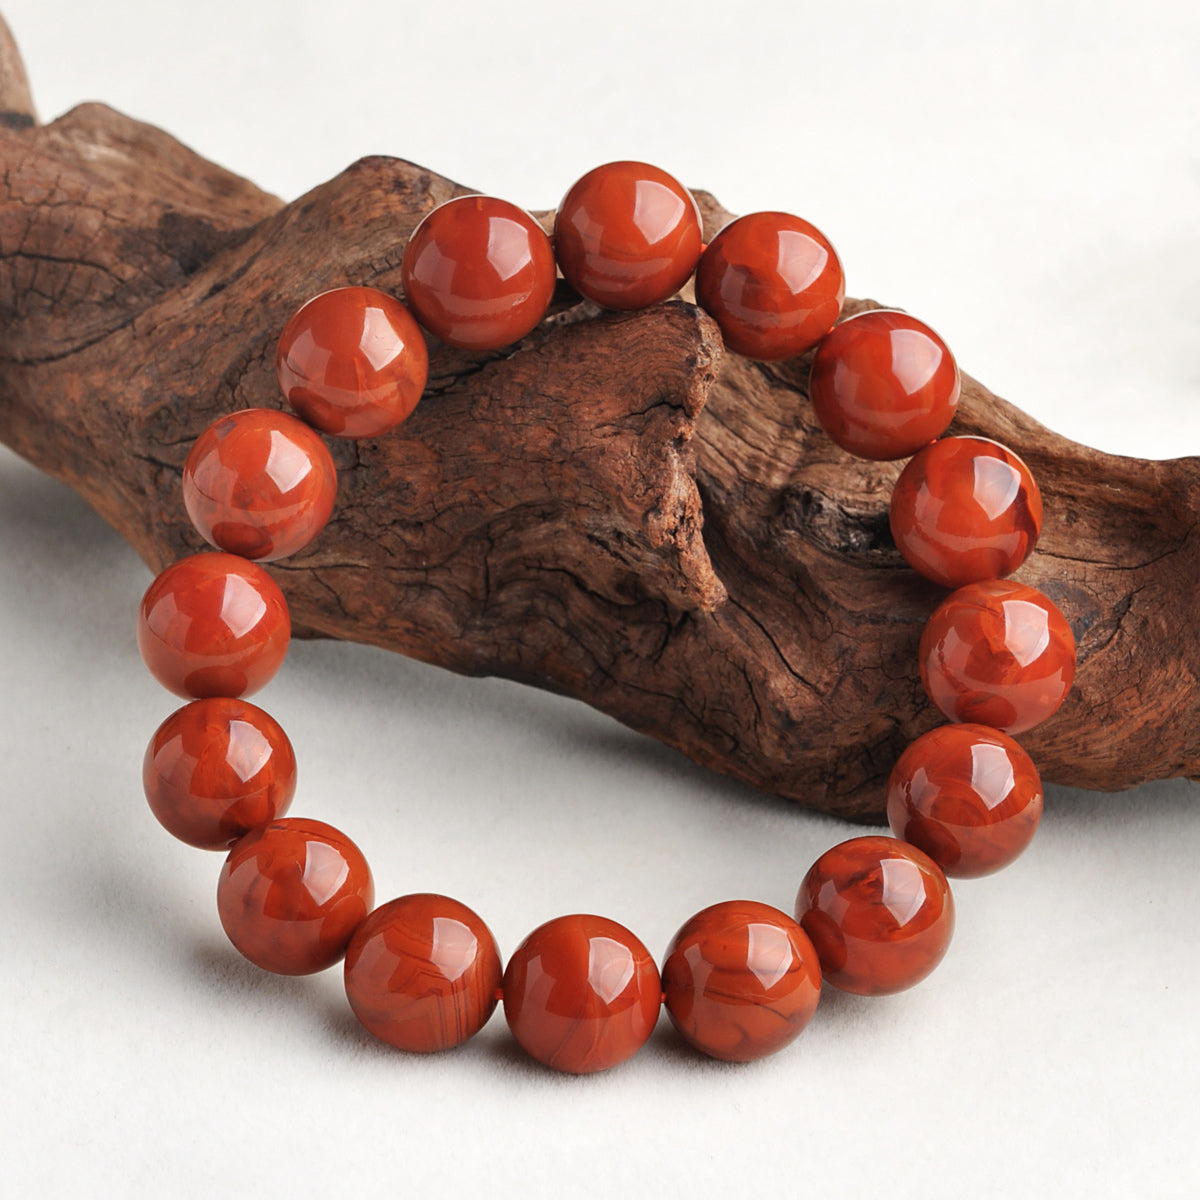 Southern Red Agate Bead Bracelet - Grade AAA